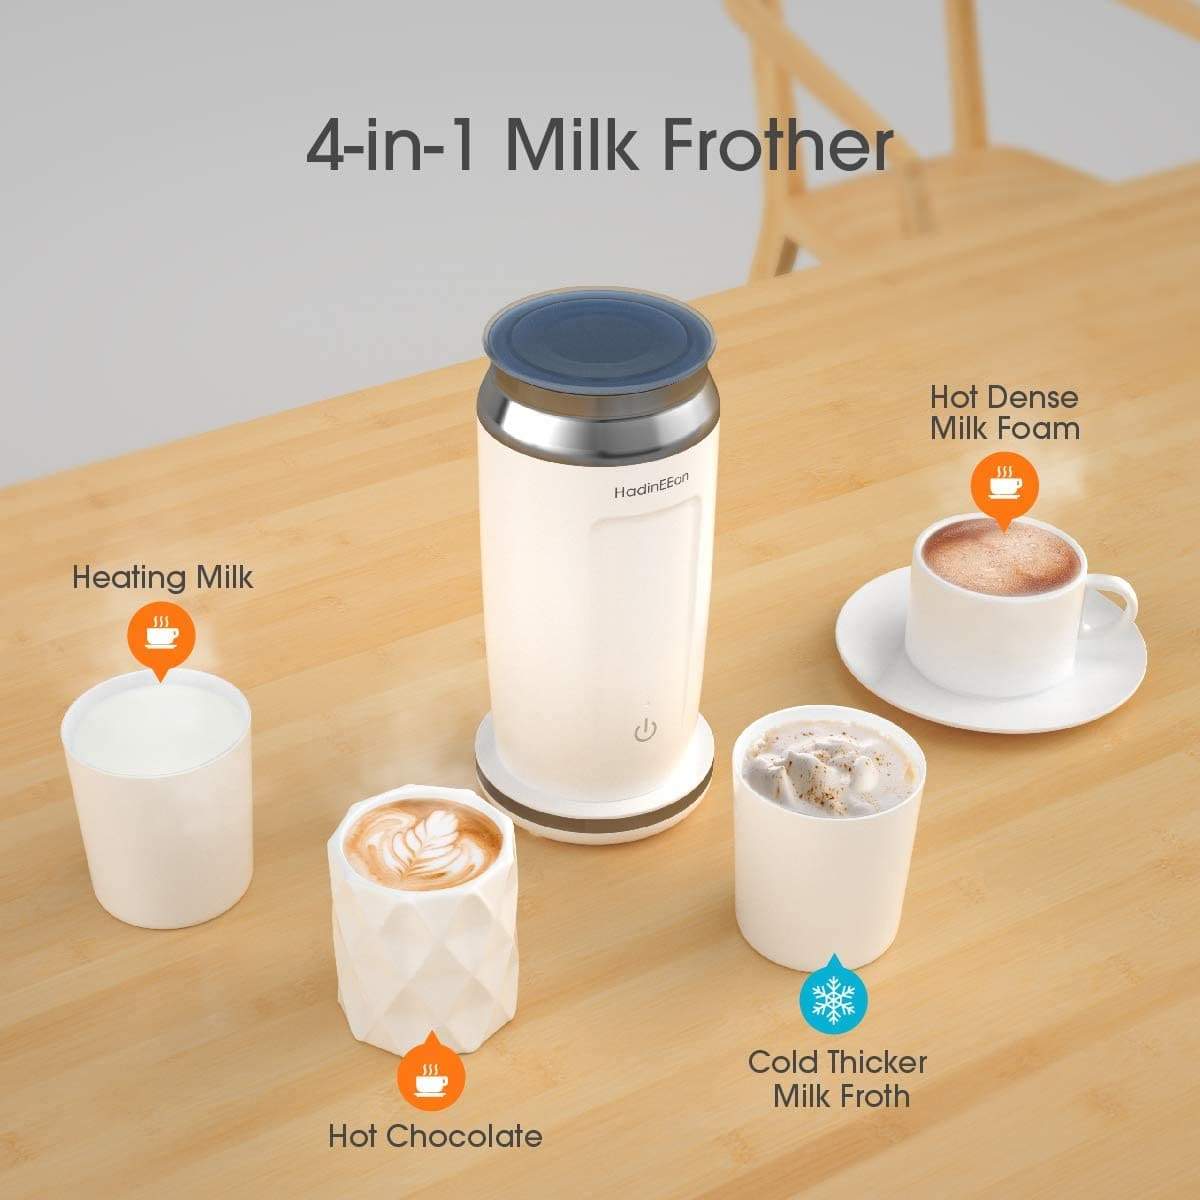 HadinEEon 4 in 1 Electric Magnetic Milk Frother 240ml, White 500W